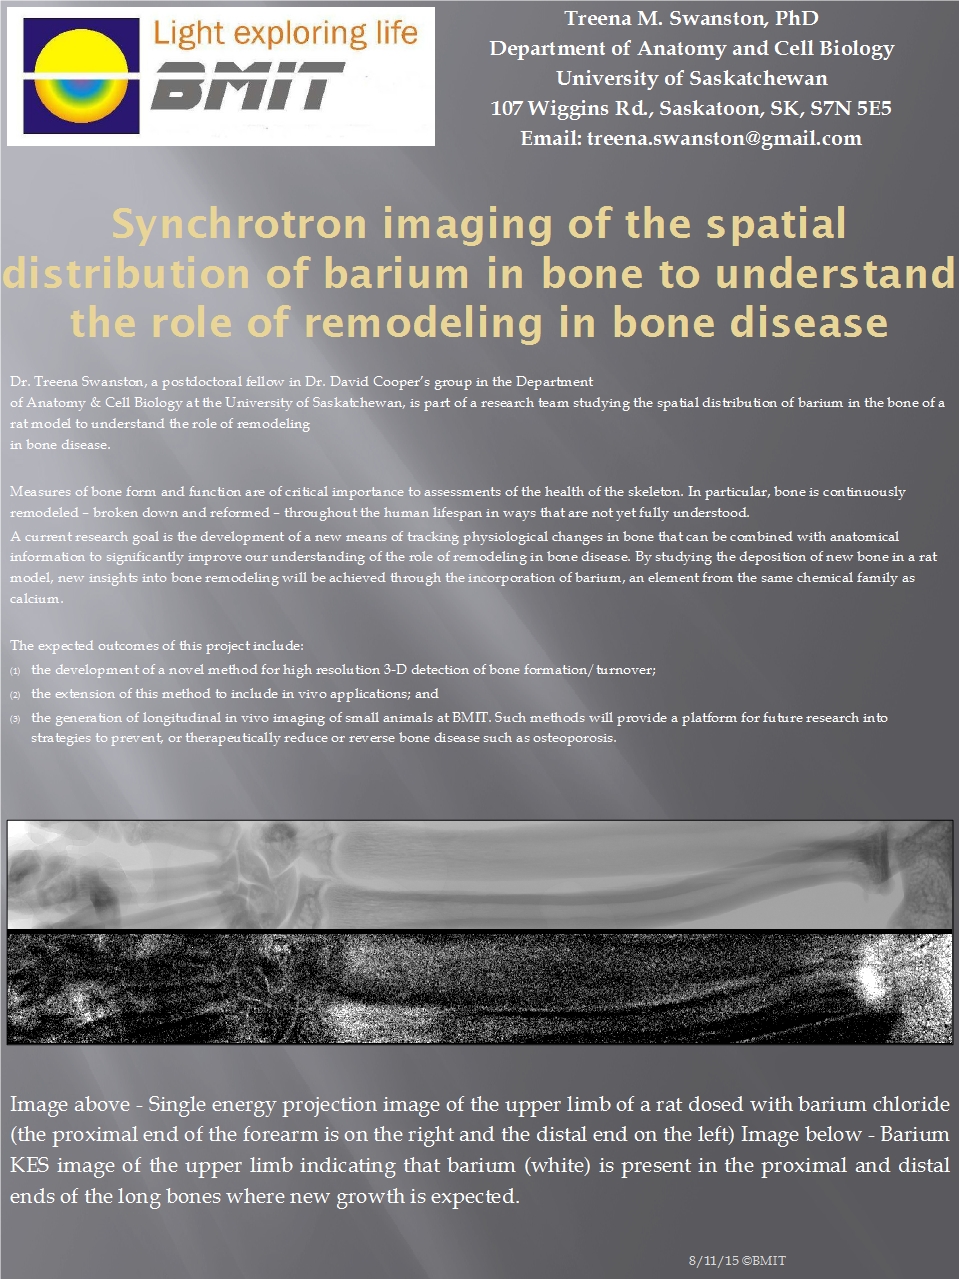 Synchrotron Imaging Of the Spatial Distribution of Barium in Bone to Understand the Role of Remodeling In Bone Disease  Image